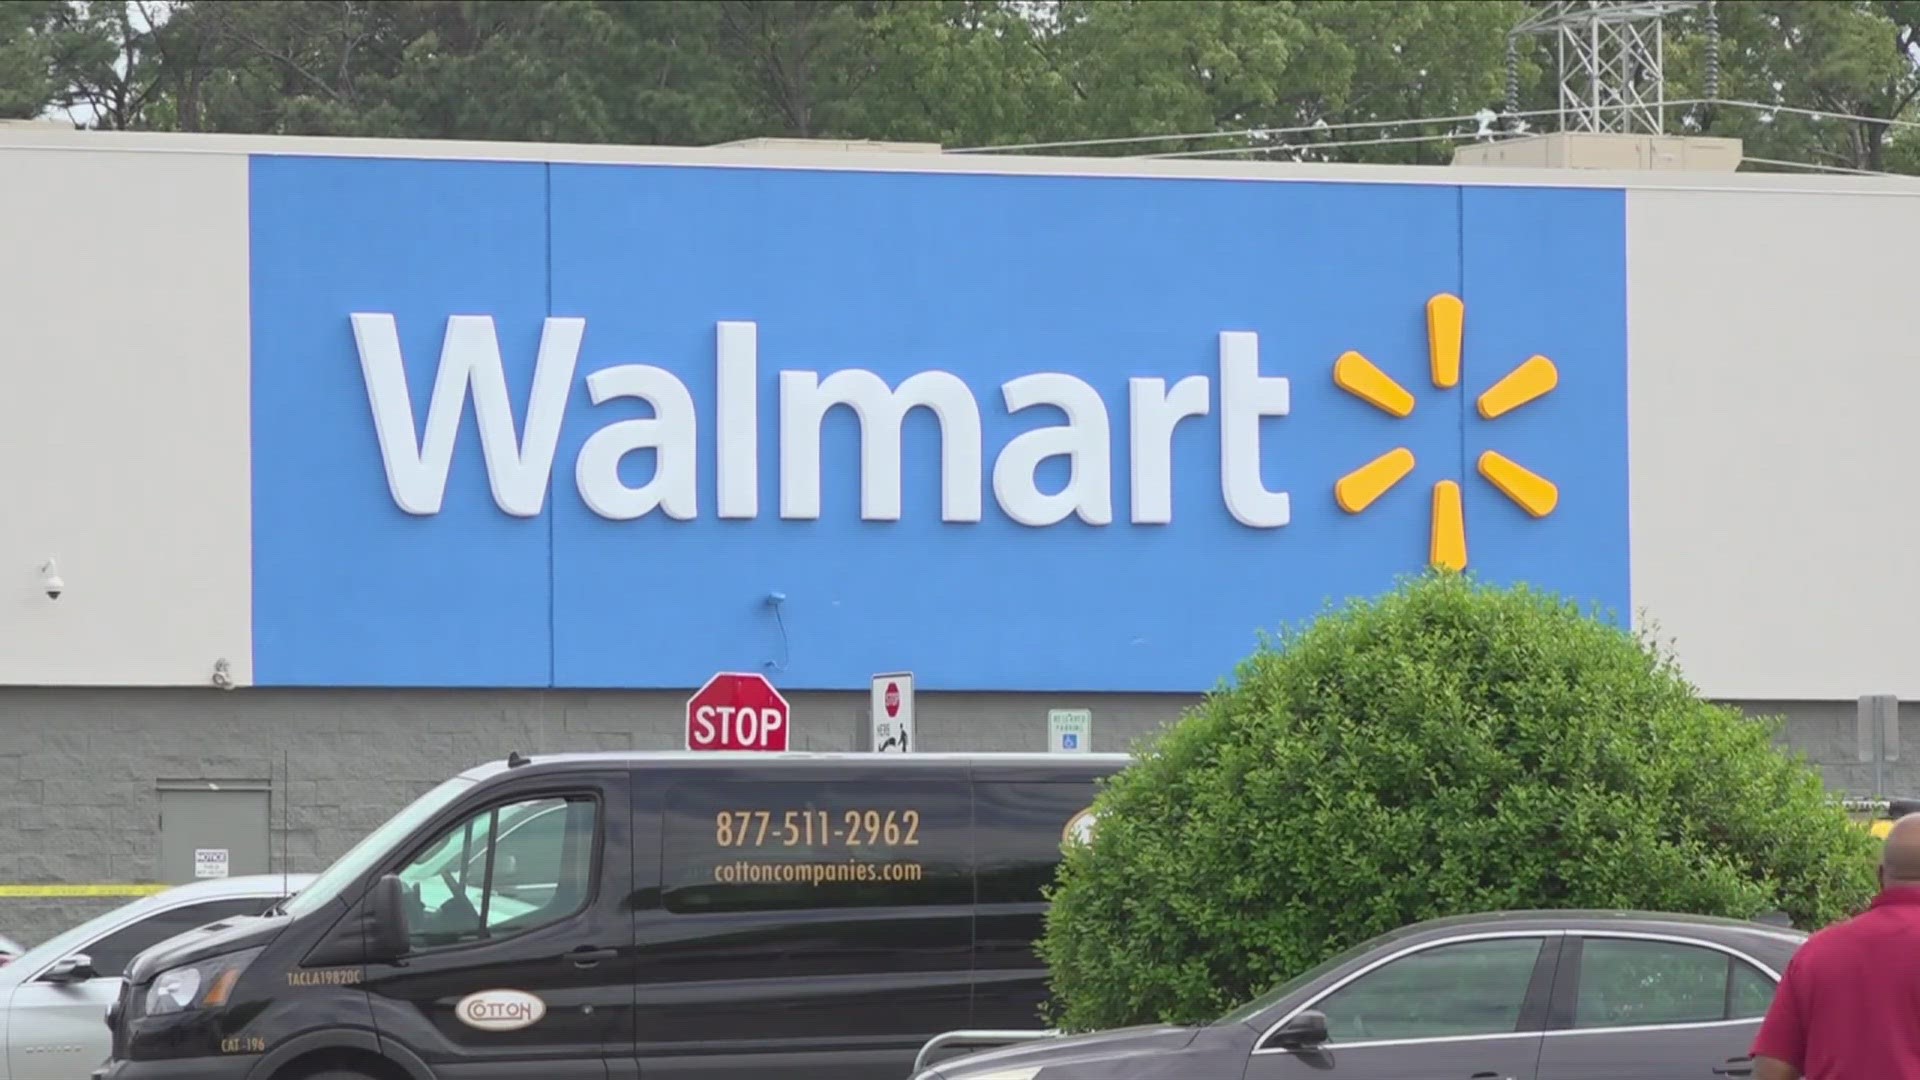 According to the Memphis Fire Department (MFD), a fire at the Austin Peay Walmart caused $2 million in damages on Sunday, April 14.